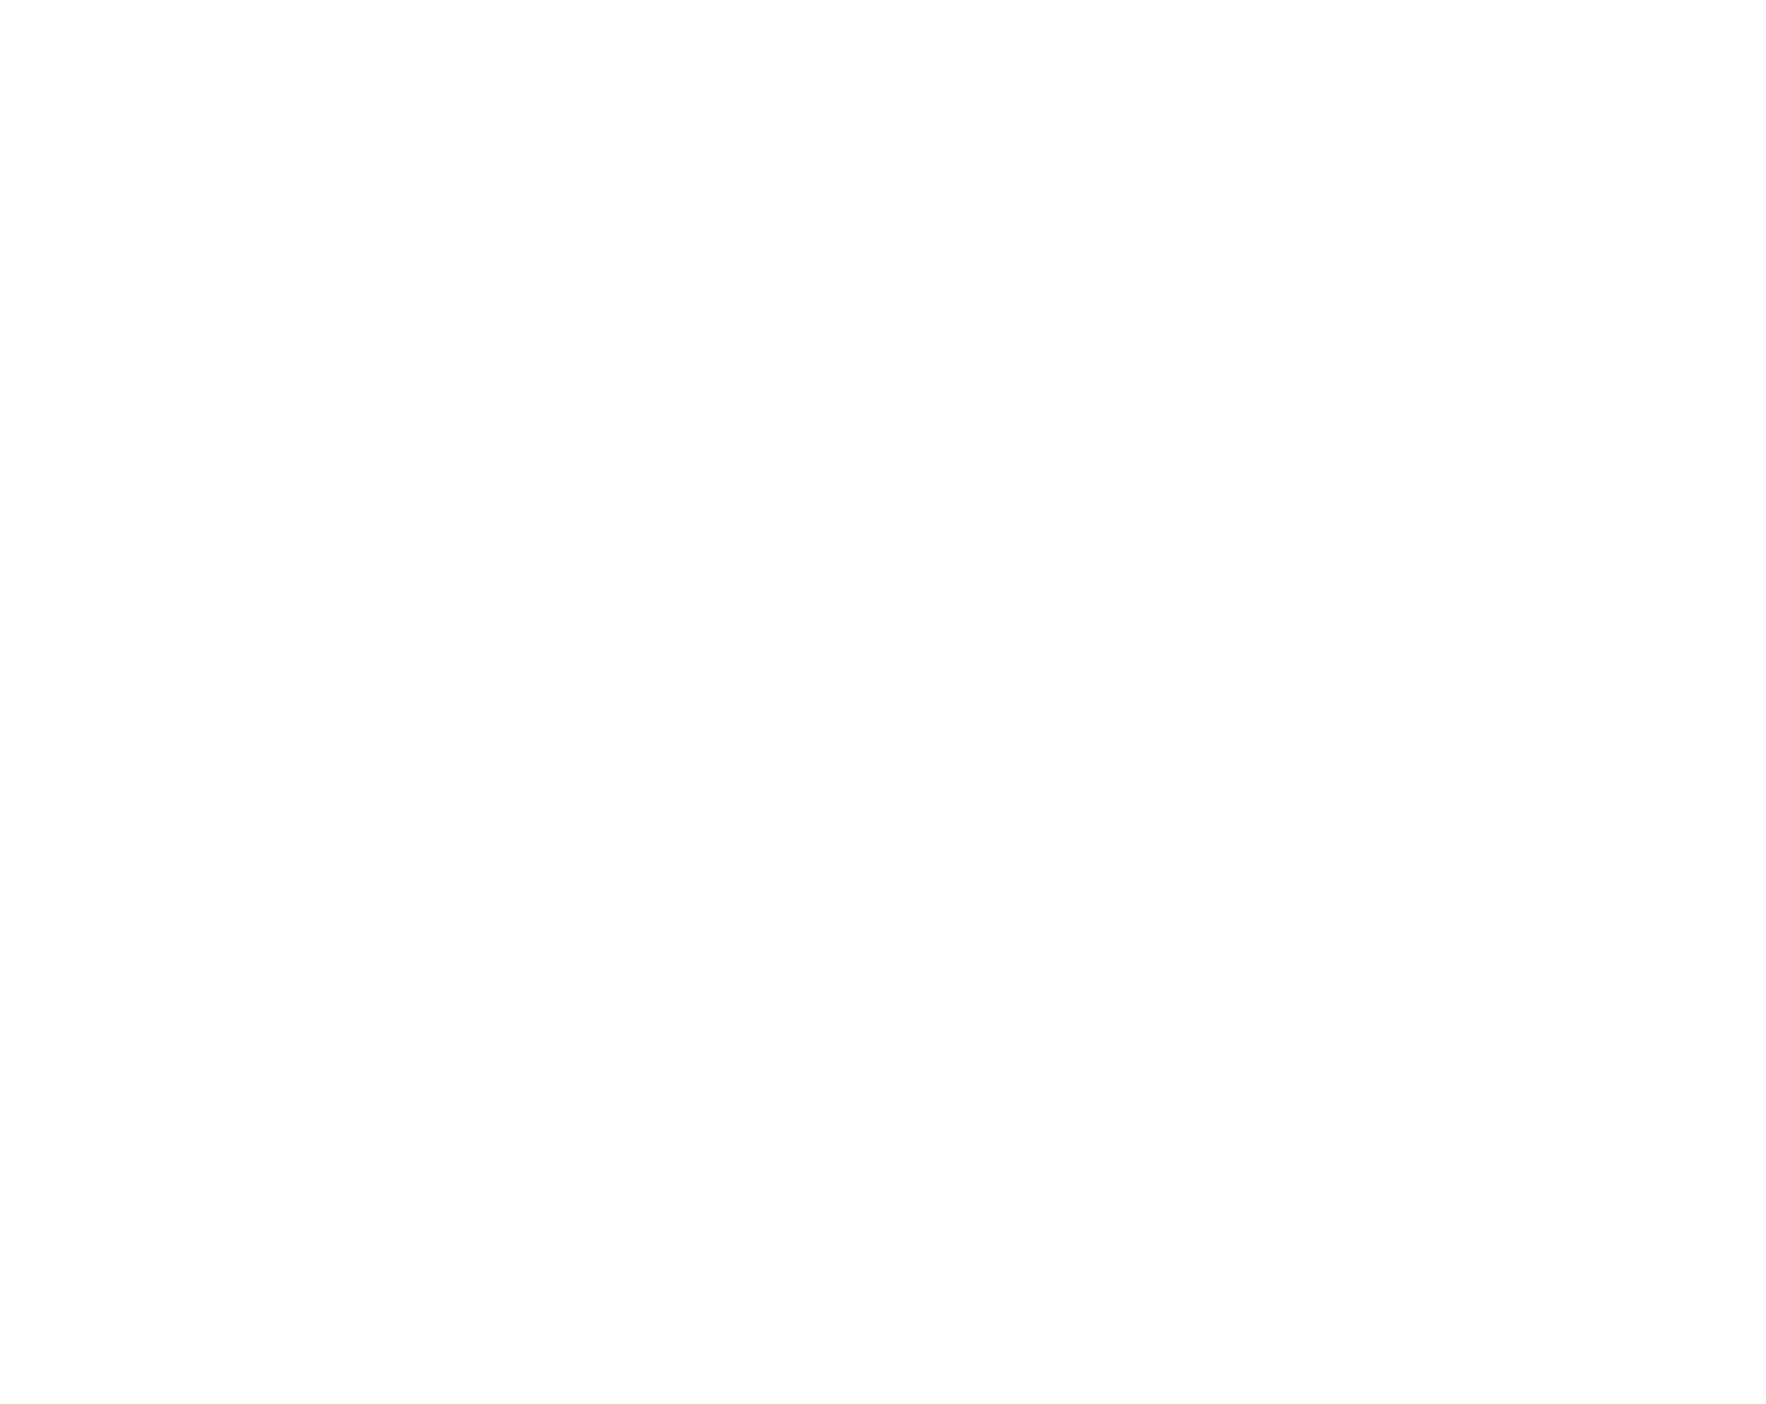 Roadrunner Property Management Logo in White linked to Home Page